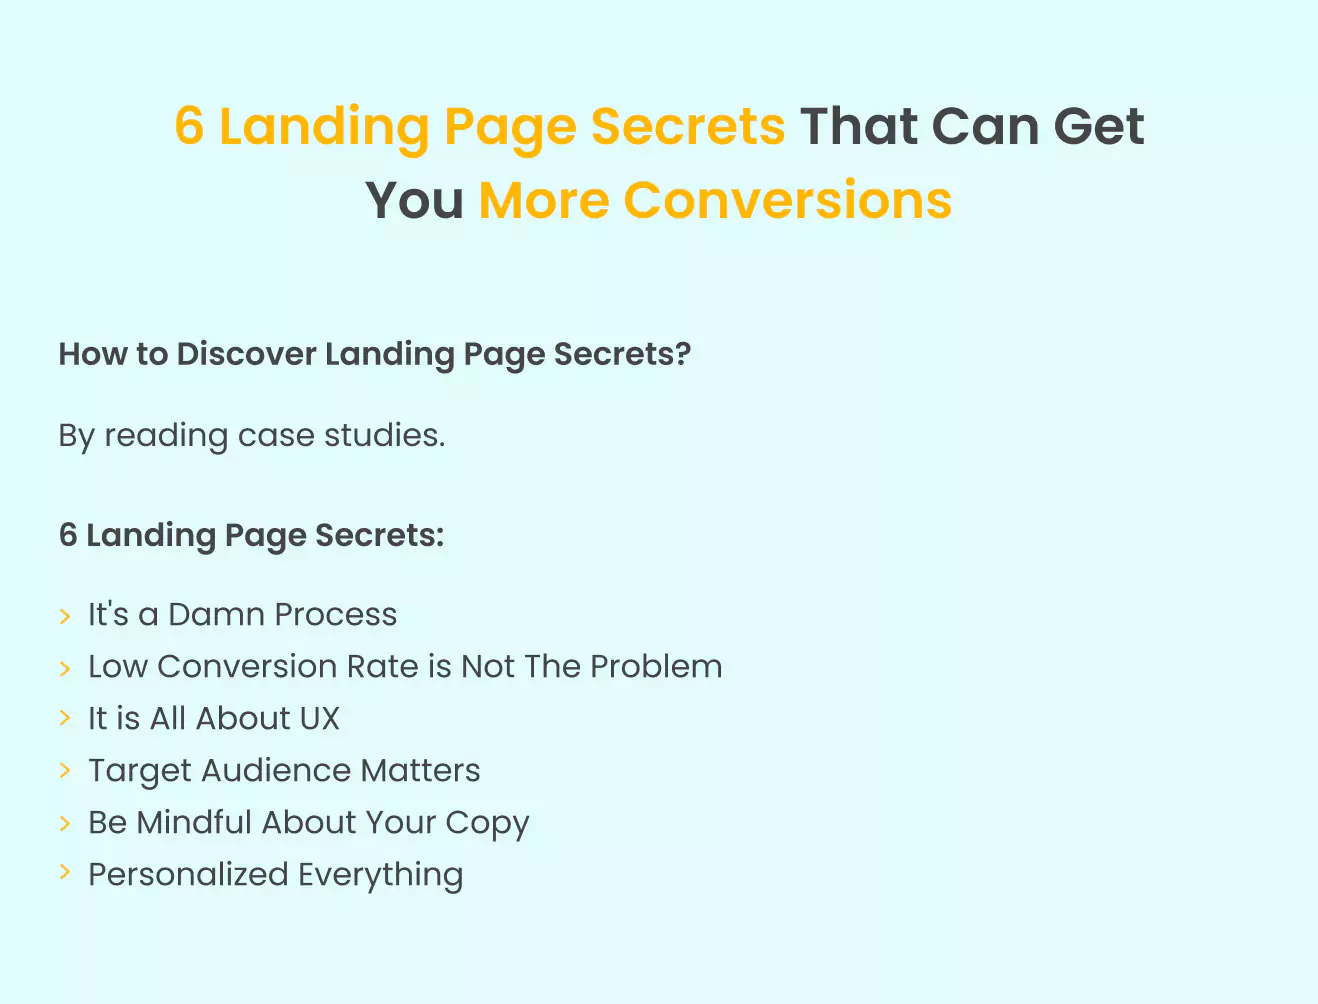 landing-page-secrets-that-can-get-you-more-conversions-summary.webp